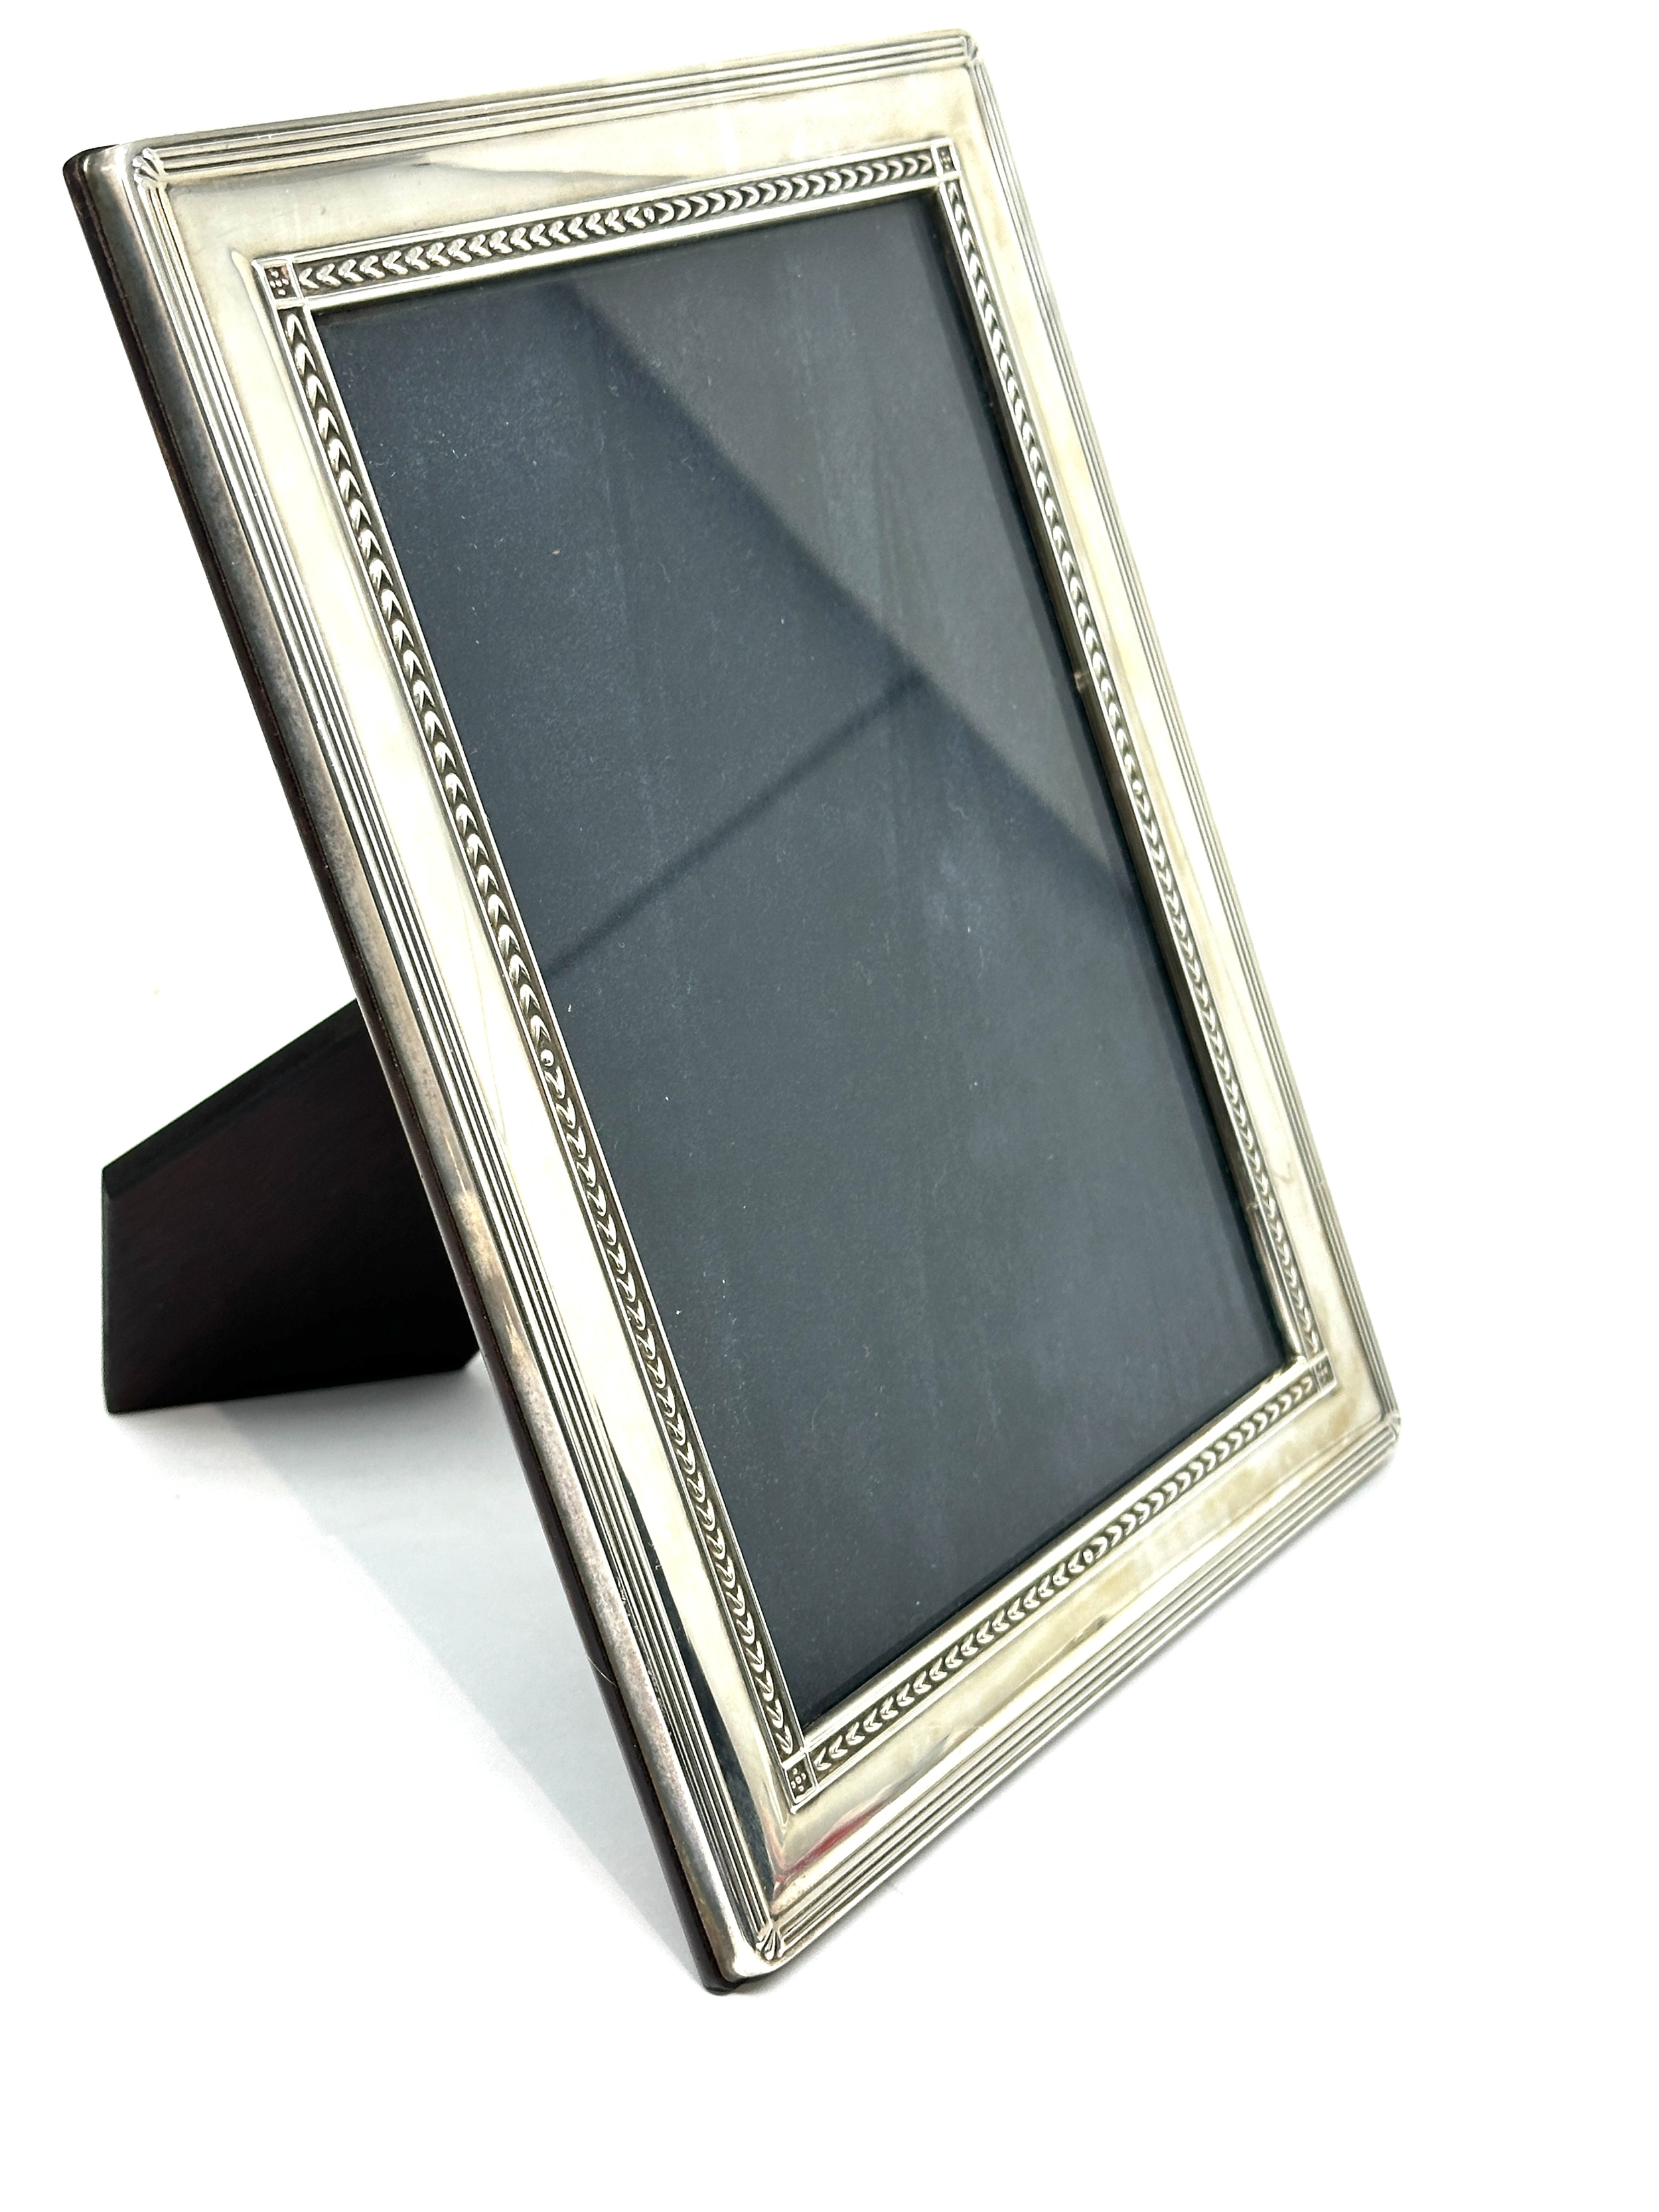 Vintage silver picture frame measures approx 22 cm by 17cm - Image 2 of 5